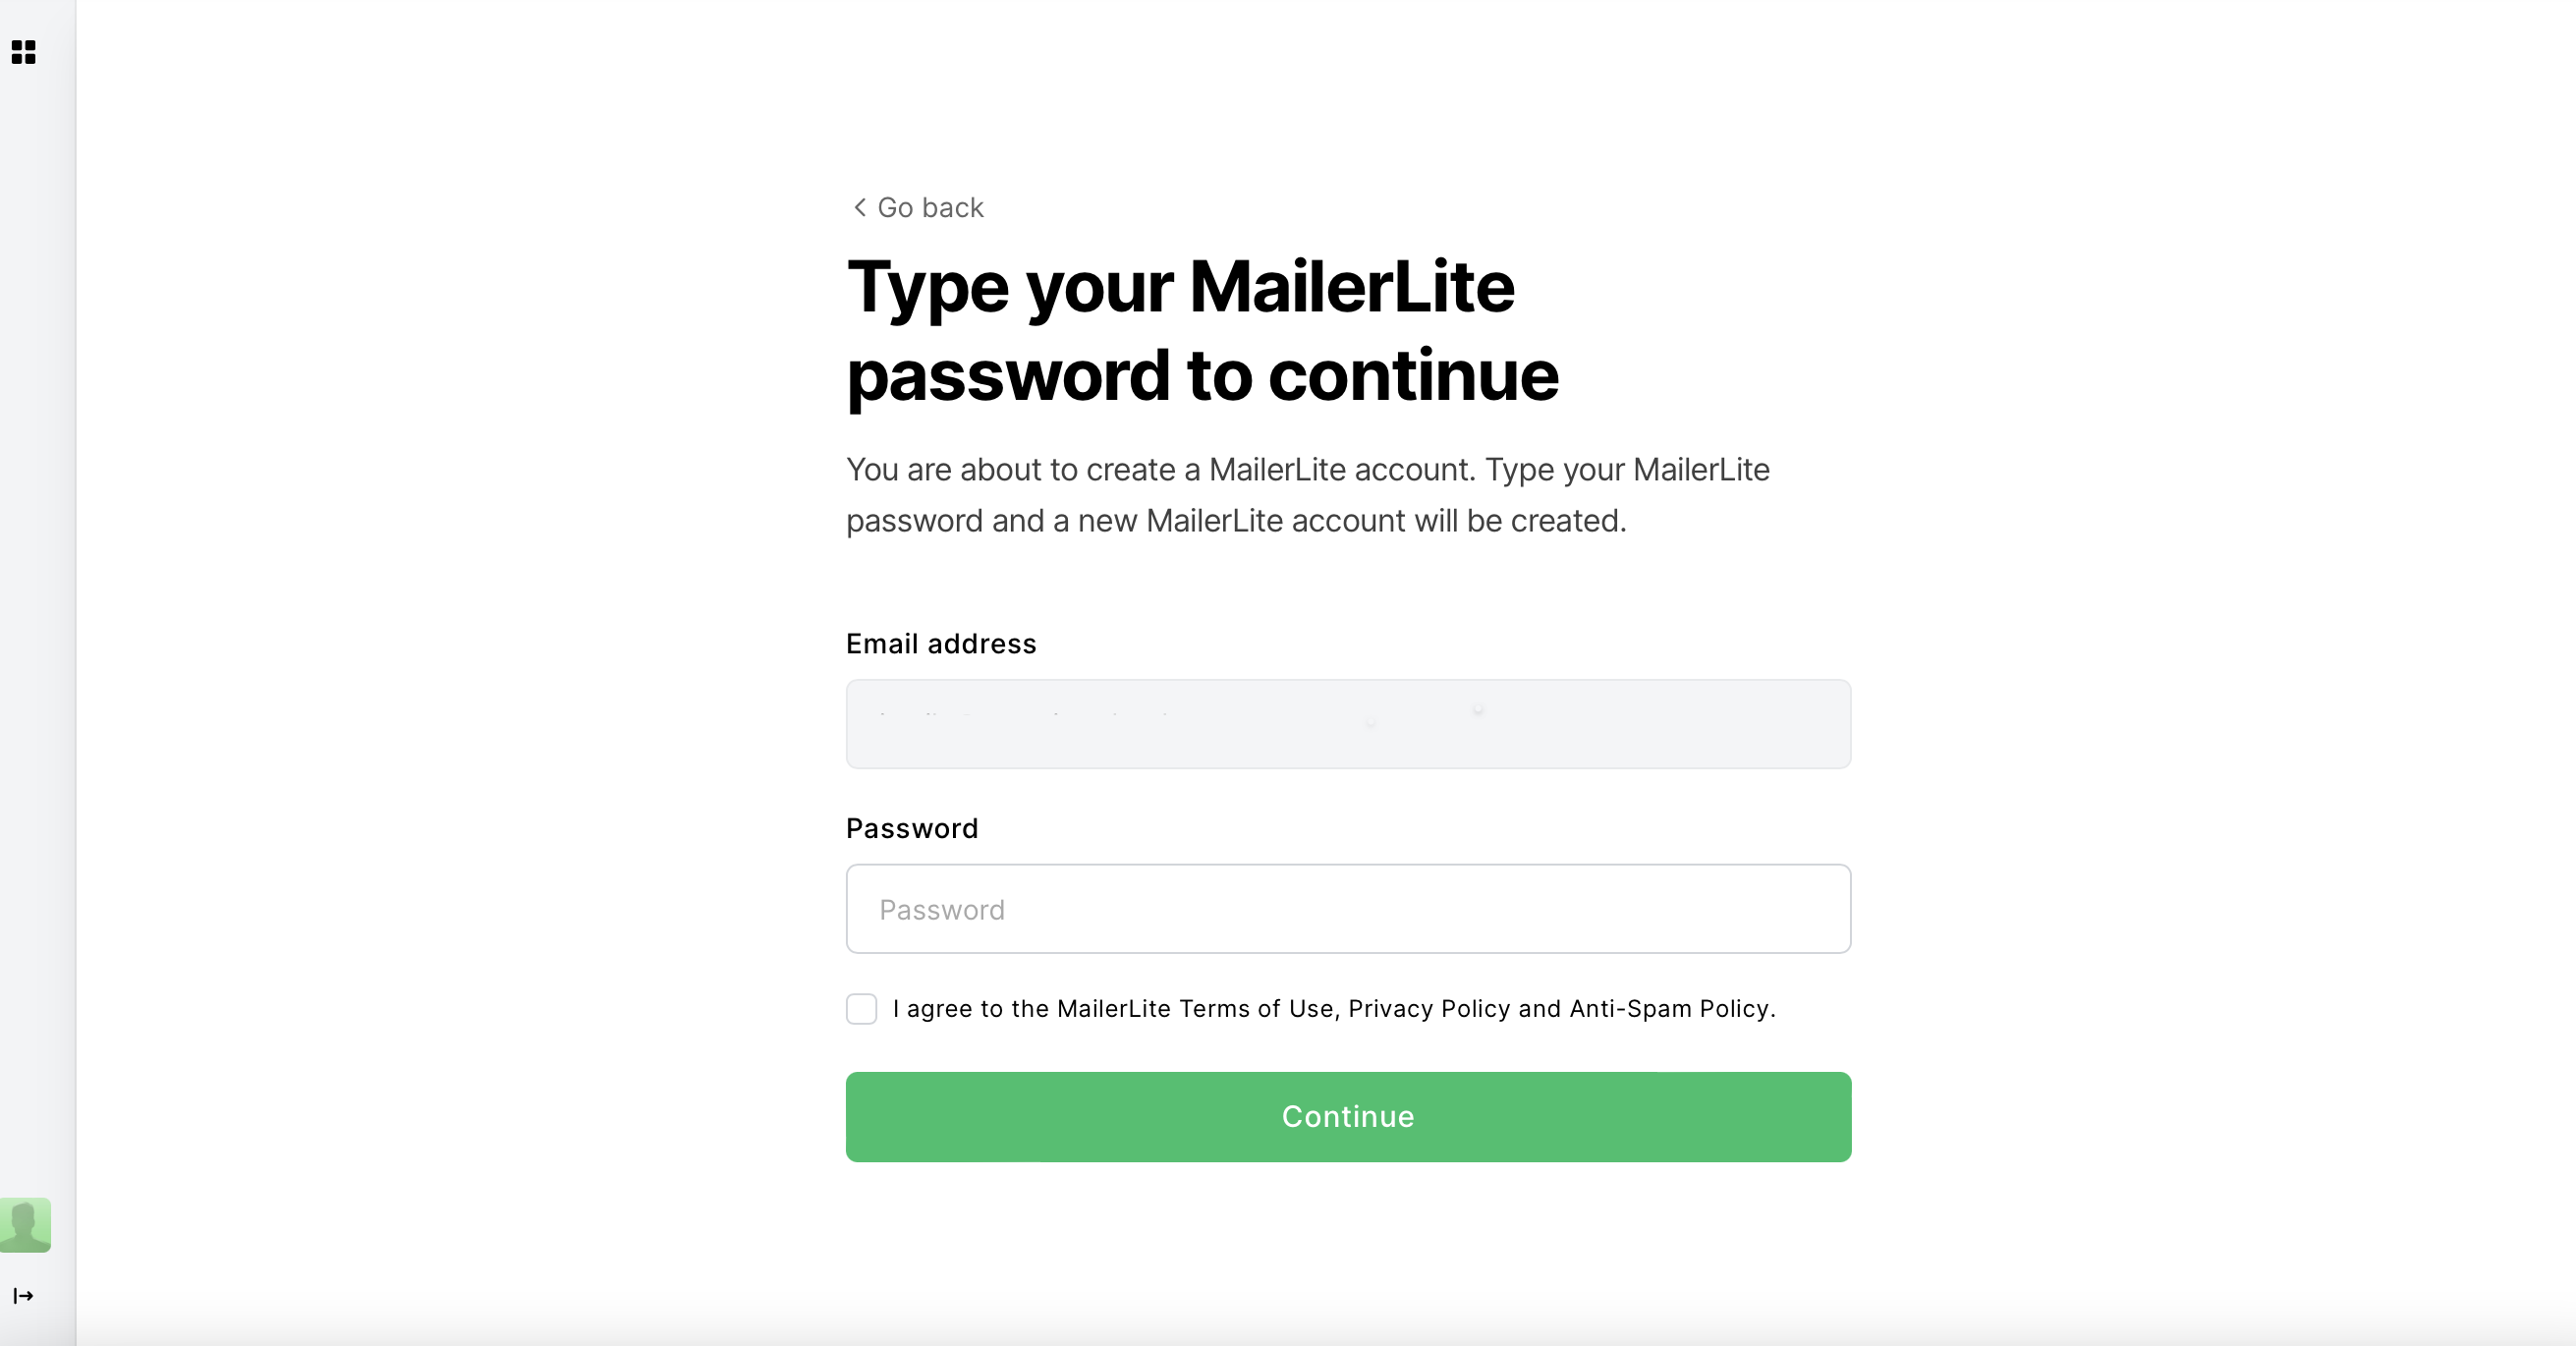 How to migrate from MailerLite Classic to MailerLite - MailerLite